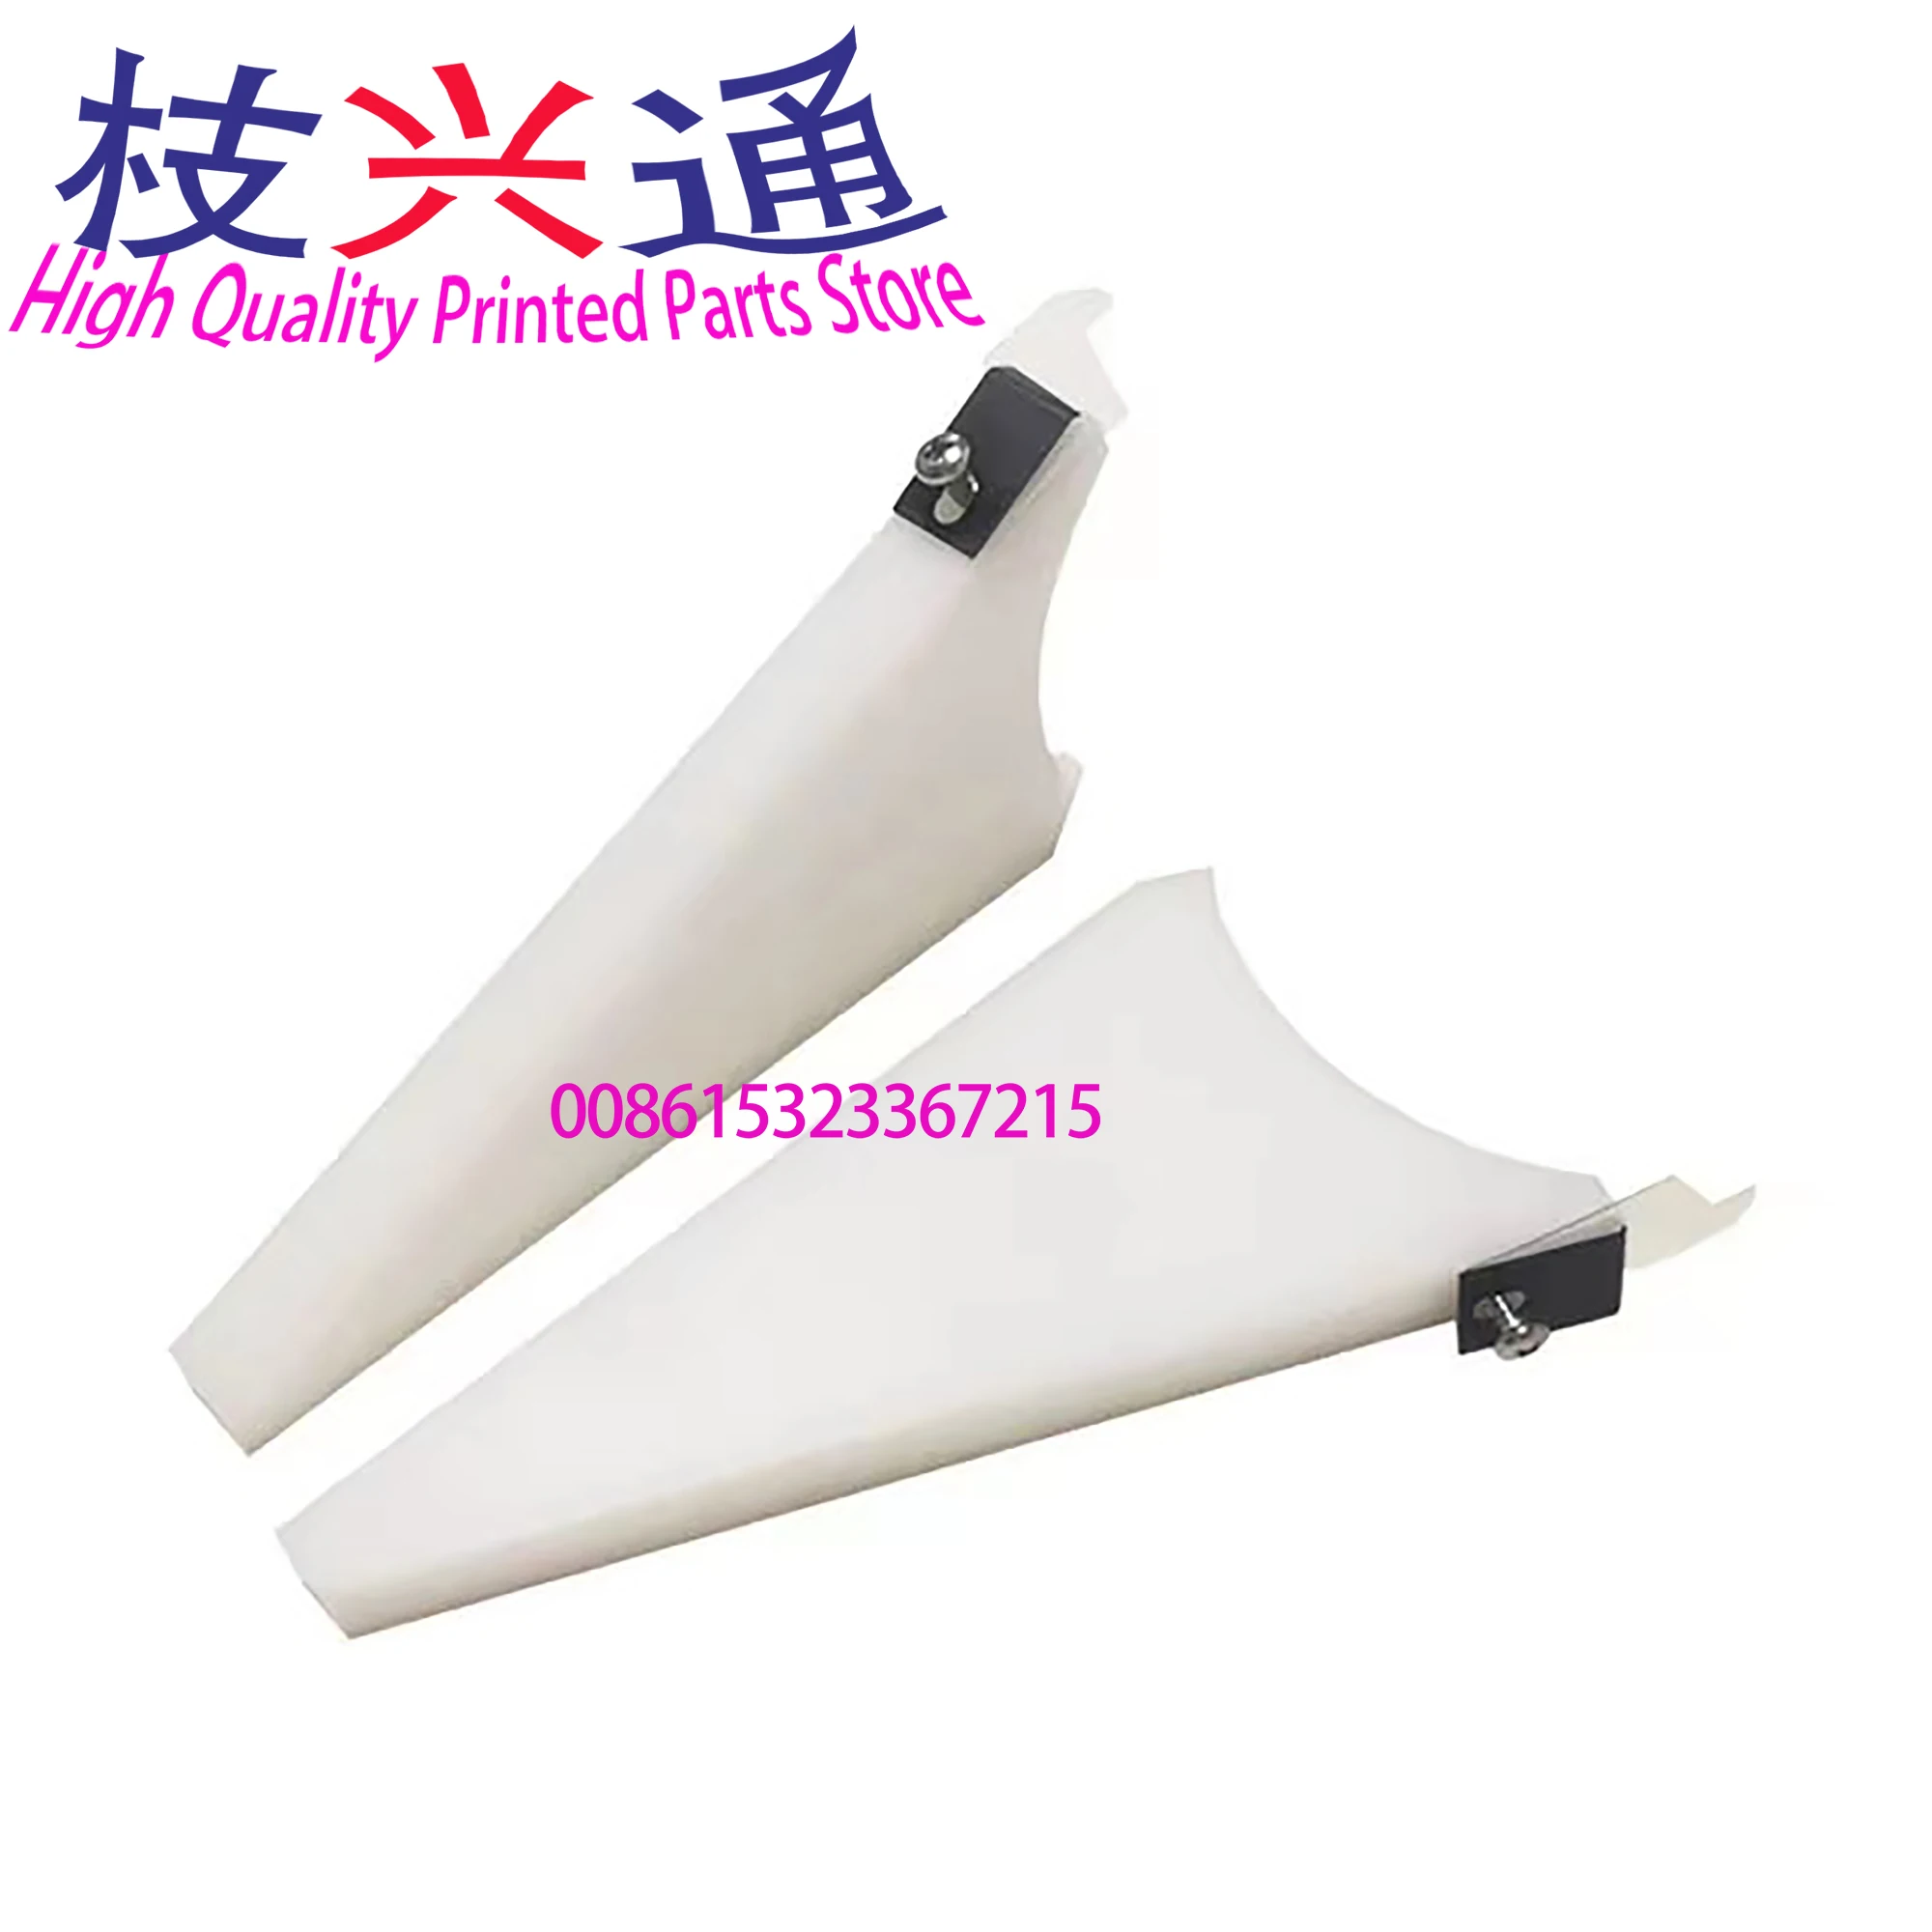 

2 sets Heidelberg CD102 Ink Duct End Blocks MV.025.468 Ink Fountain Divider For Offset Printing Machines Spare Parts MV025468